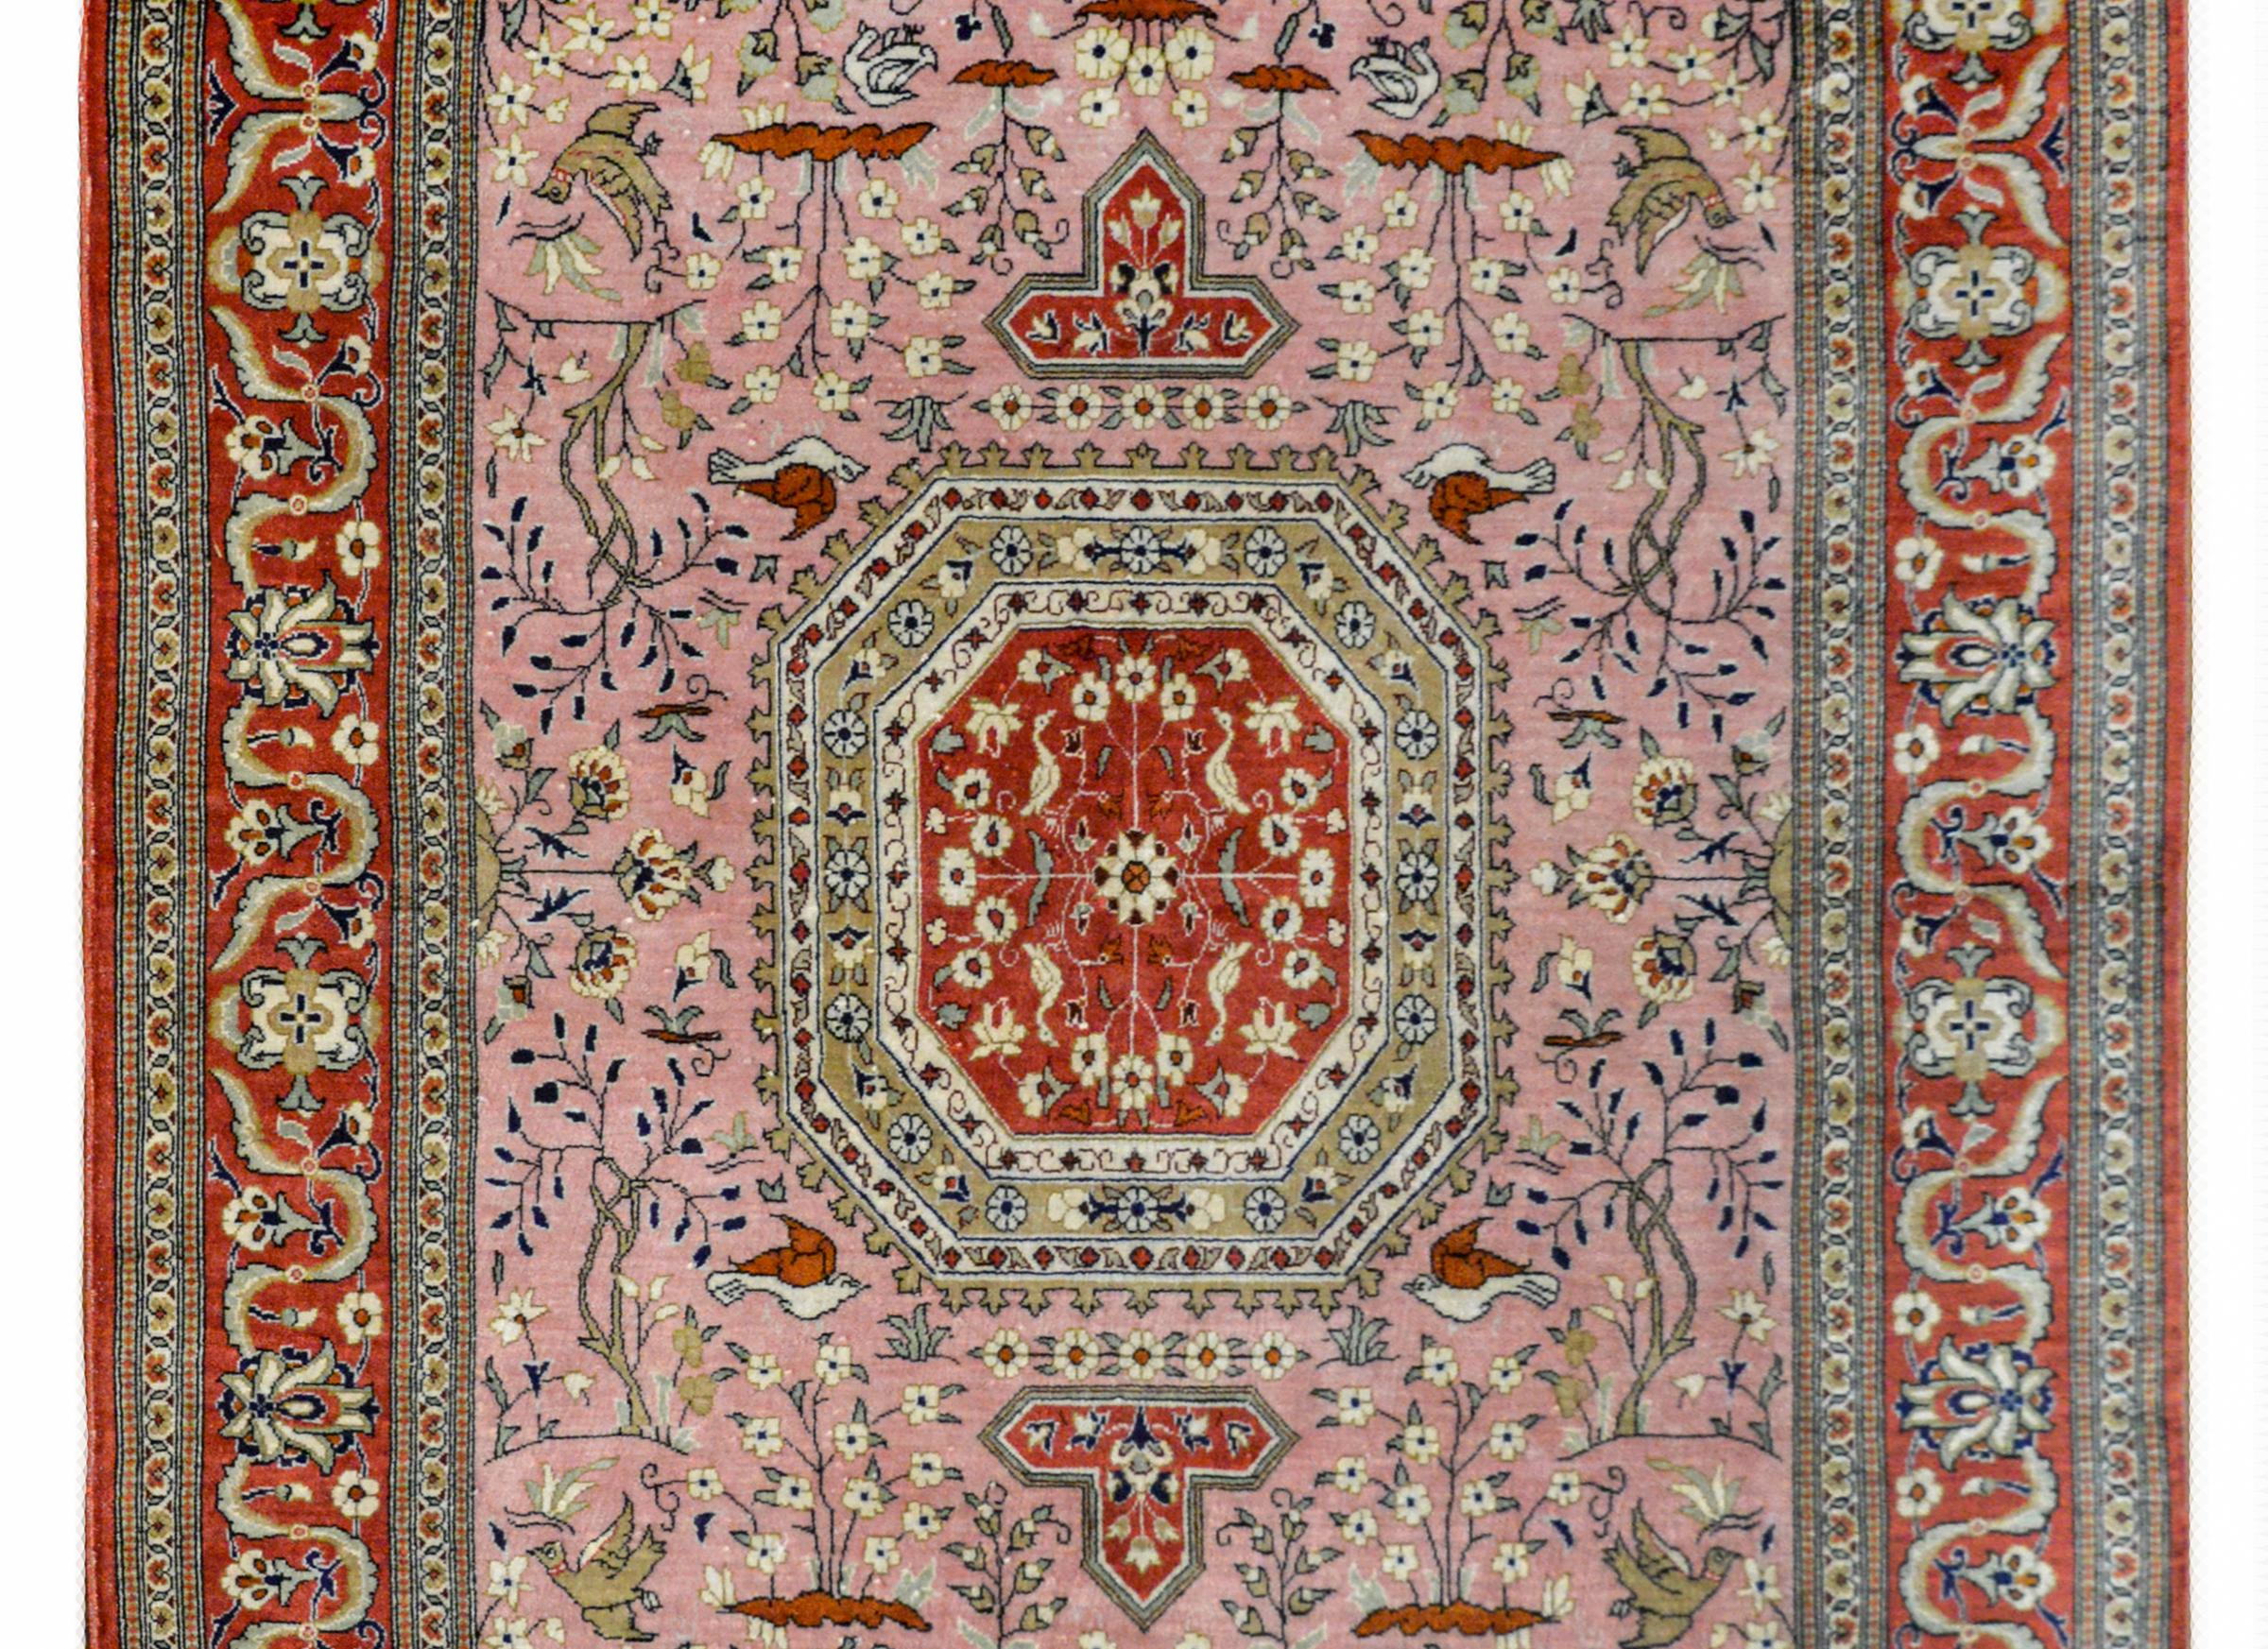 A beautiful vintage Persian Qum silk rug with an eight sided medallion with a floral pattern set amidst a field of myriad flowers, birds, and deer, all woven in brown, white, and crimson, set against a pink background, and surrounded by a complex